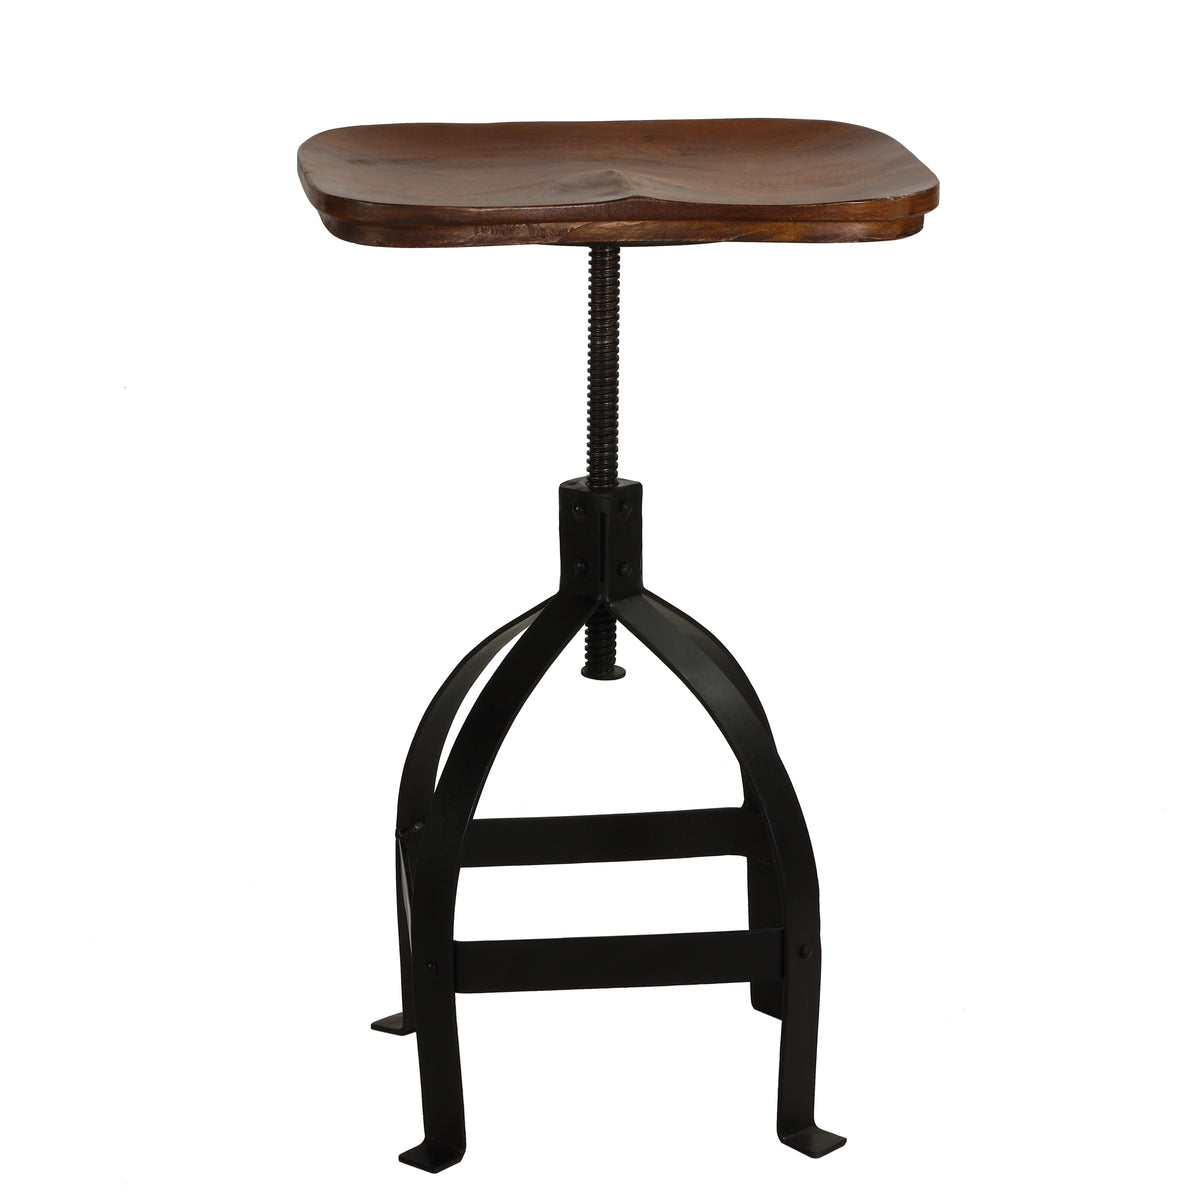 Bare Decor Keg Counter Swivel Stool in Solid Wood and Black Metal, Adjustable Height